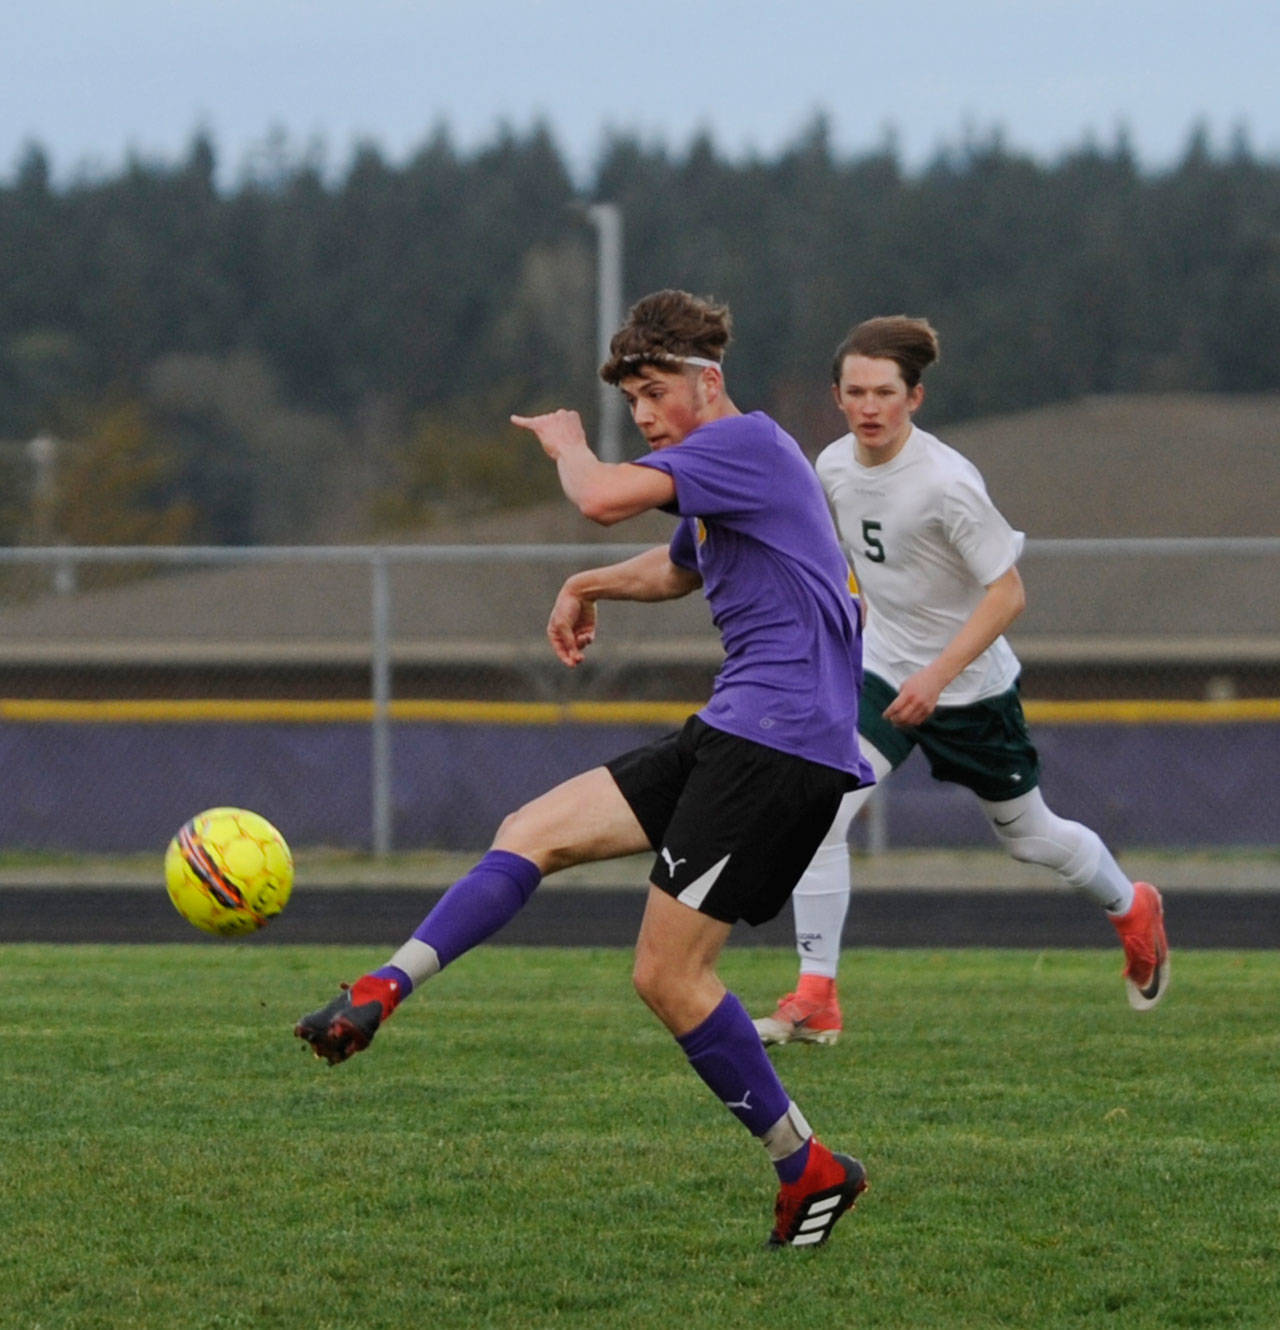 Sequim’s Adrian Funston looks for an open teammate as Port Angeles’ Hollund Bailey looks on in Sequim’s 1-0 win over the Roughriders on April 9. Funston had the game’s only score, a first half tally off a feed from Mathys Tanche. Sequim Gazette photo by Michael Dashiell                                 Sequim’s Adrian Funston looks for an open teammate as Port Angeles’ Hollund Bailey looks on in Sequim’s 1-0 win over the Roughriders on April 9. Funston had the game’s only score, a first half tally off a feed from Mathys Tanche. Sequim Gazette photo by Michael Dashiell                                 Sequim’s Adrian Funston looks for an open teammate as Port Angeles’ Hollund Bailey looks on in Sequim’s 1-0 win over the Roughriders on April 9. Funston had the game’s only score, a first half tally off a feed from Mathys Tanche. Sequim Gazette photo by Michael Dashiell